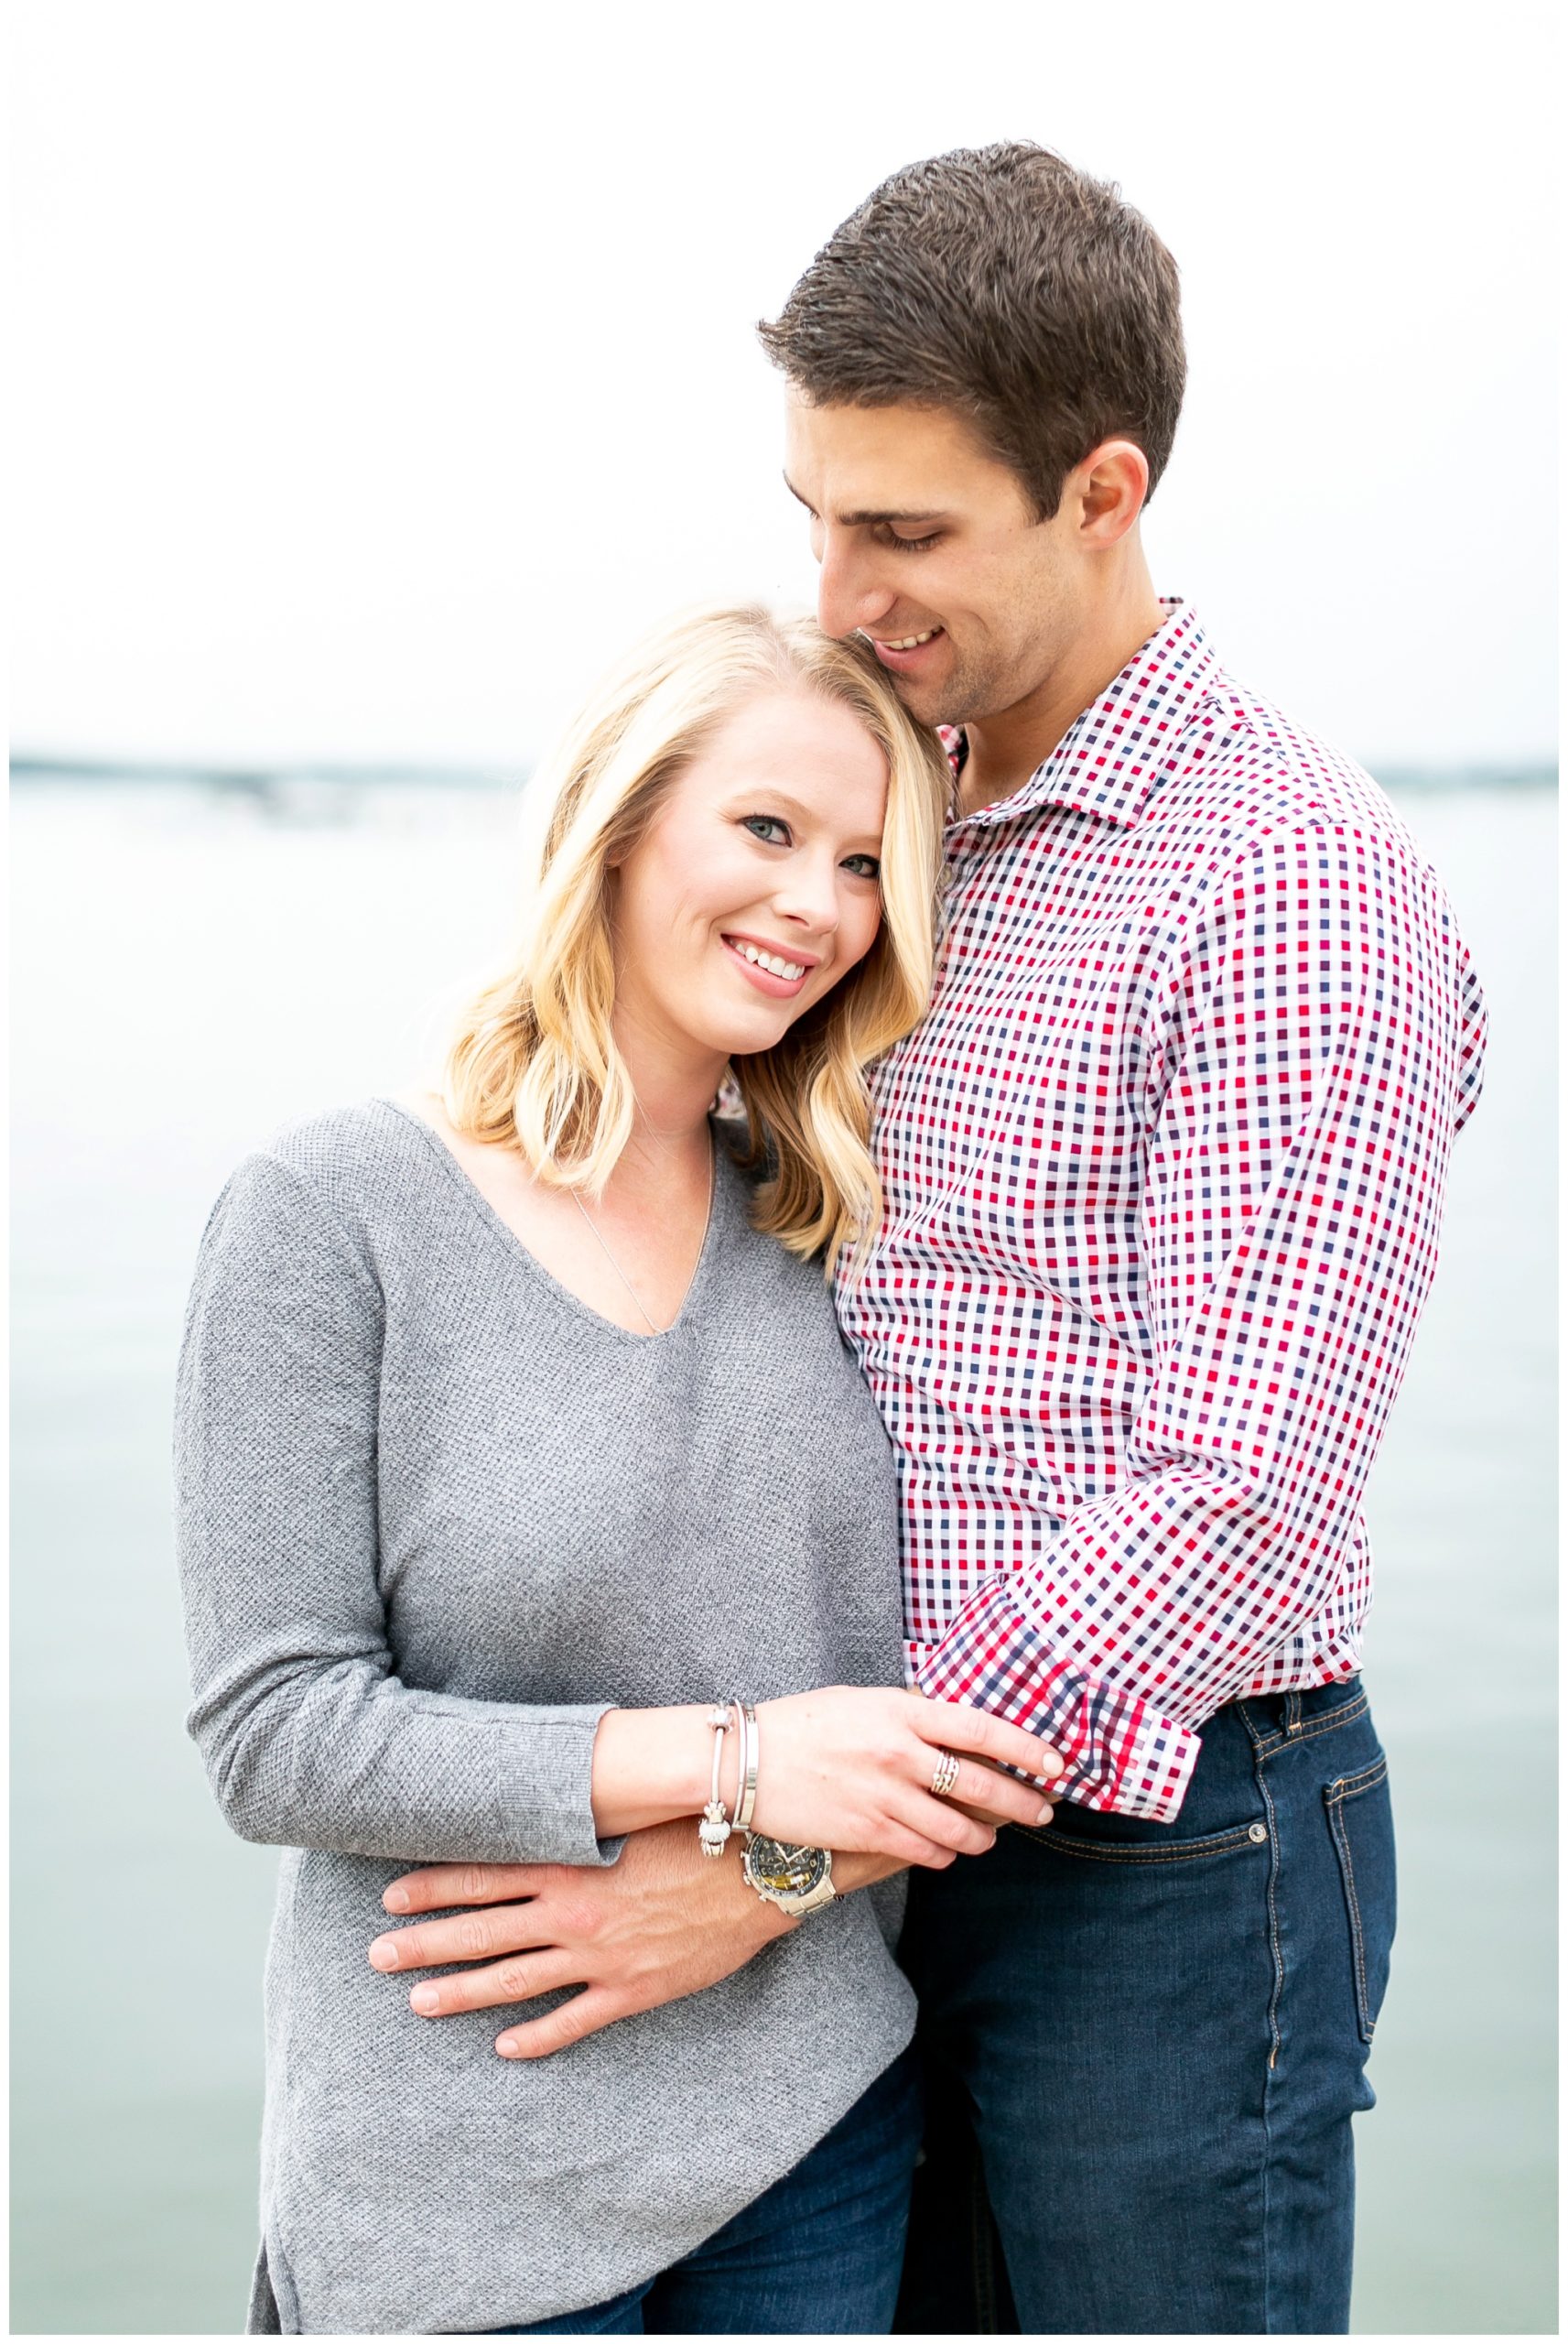 Downtown_madison_wisconsin_engagement_session_1521.jpg